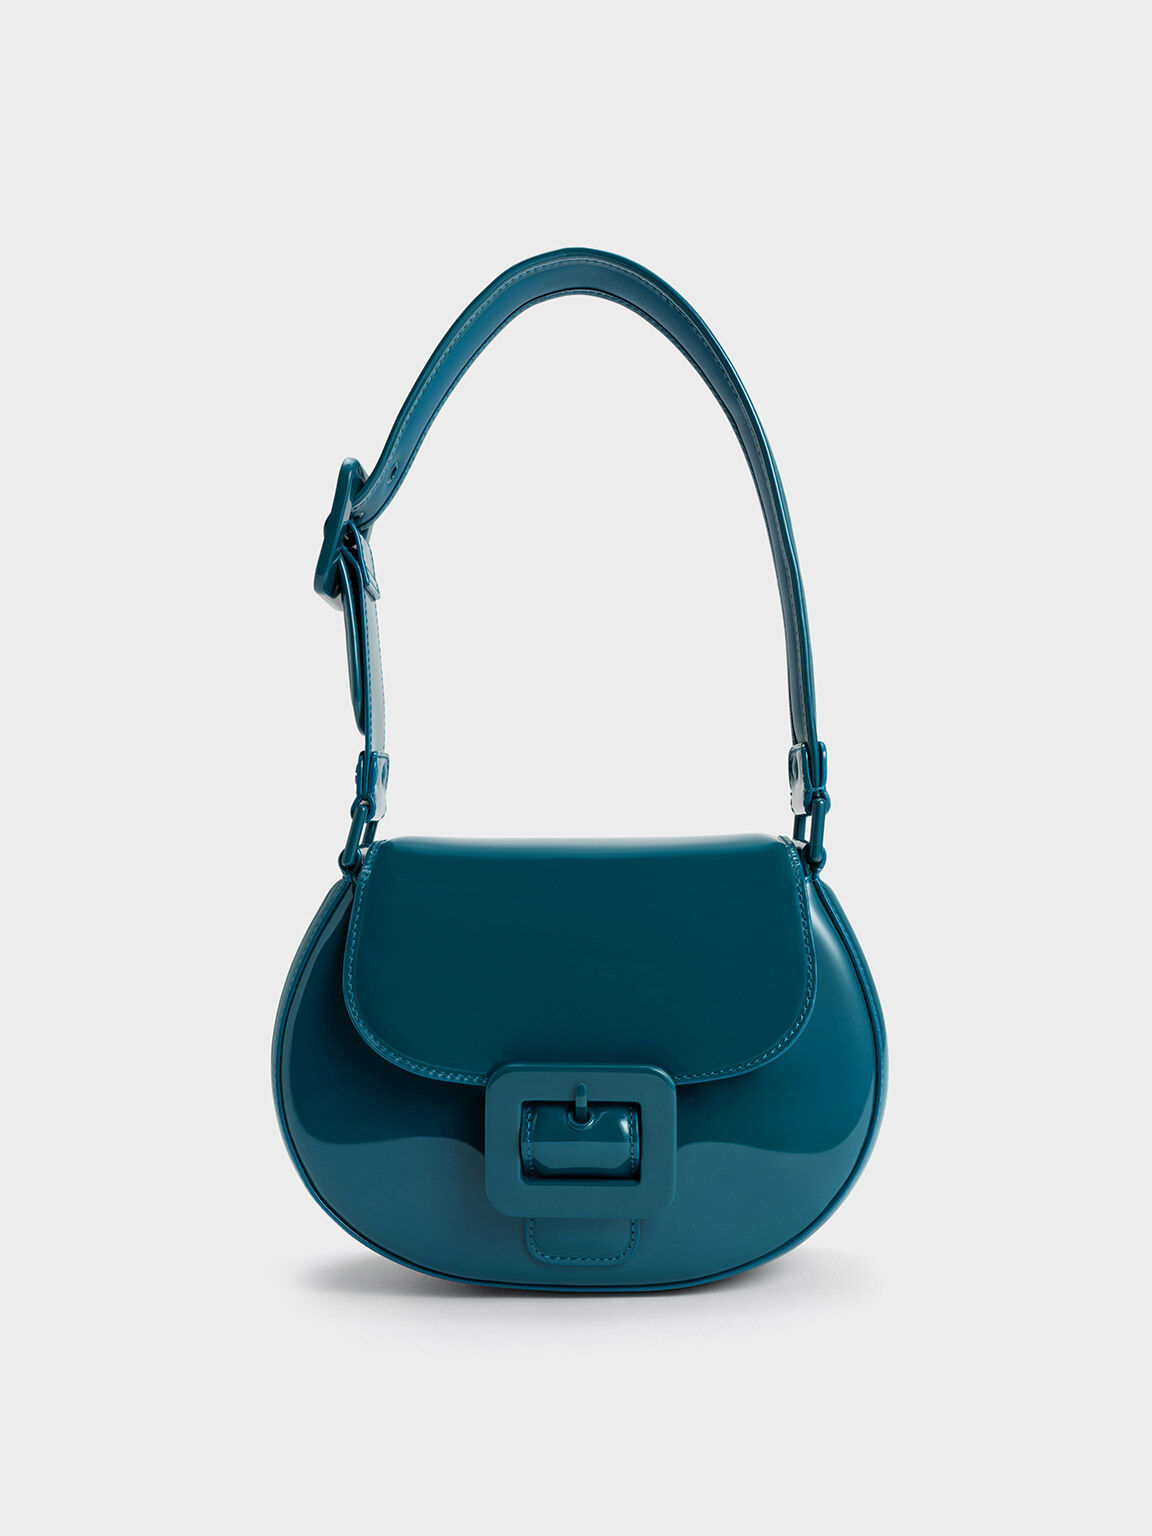 Lula Patent Buckled Bag, Turquoise, hi-res